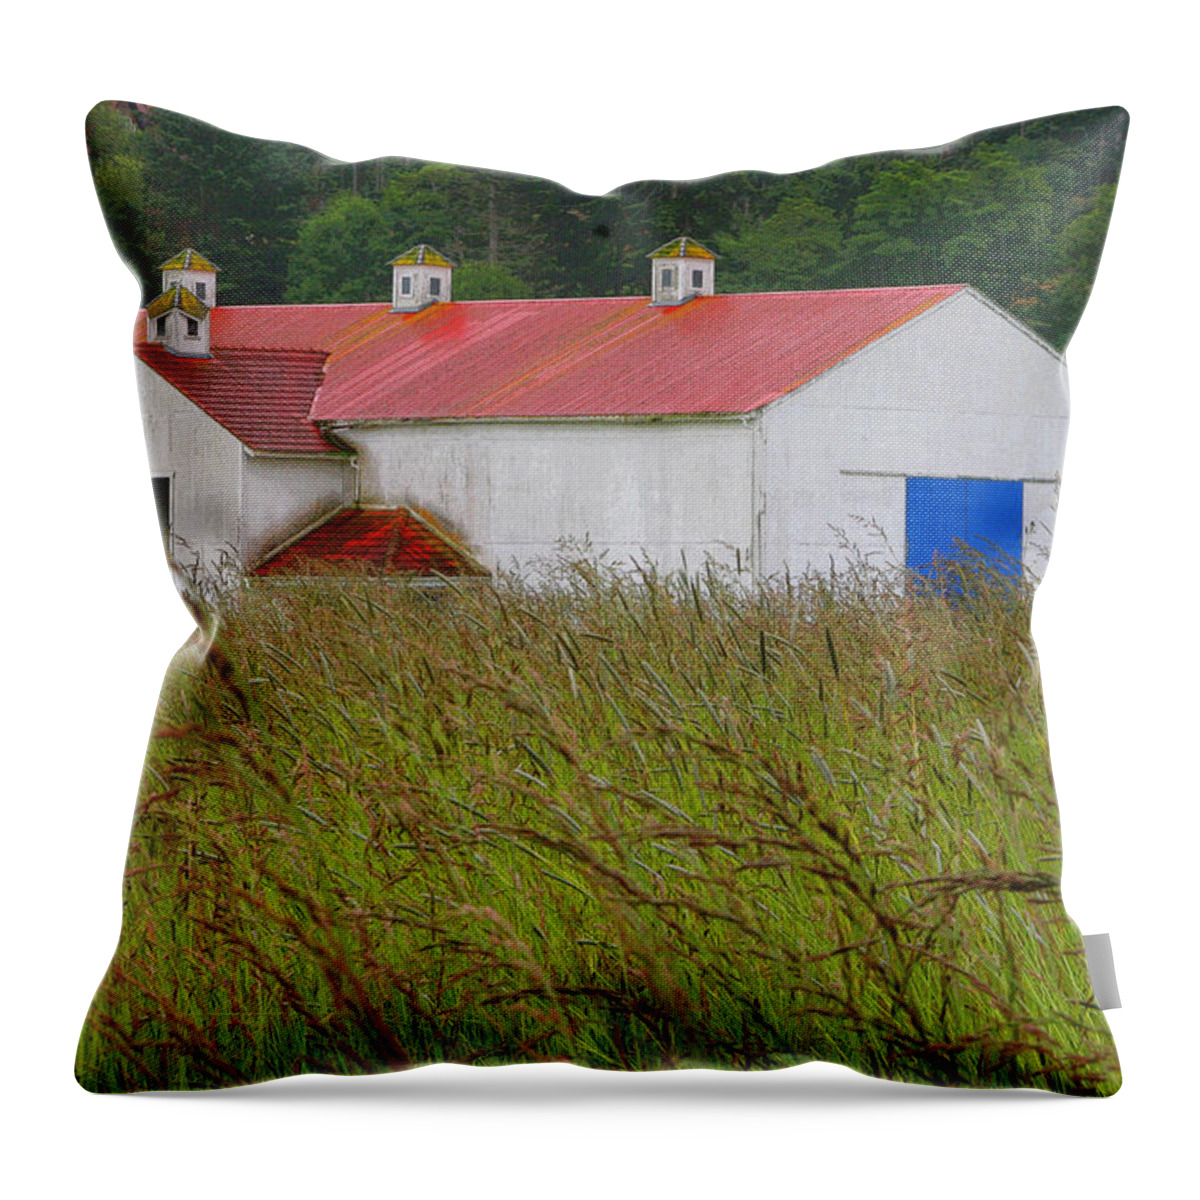 San Juan Island Throw Pillow featuring the photograph Barn with Blue Door by Art Block Collections